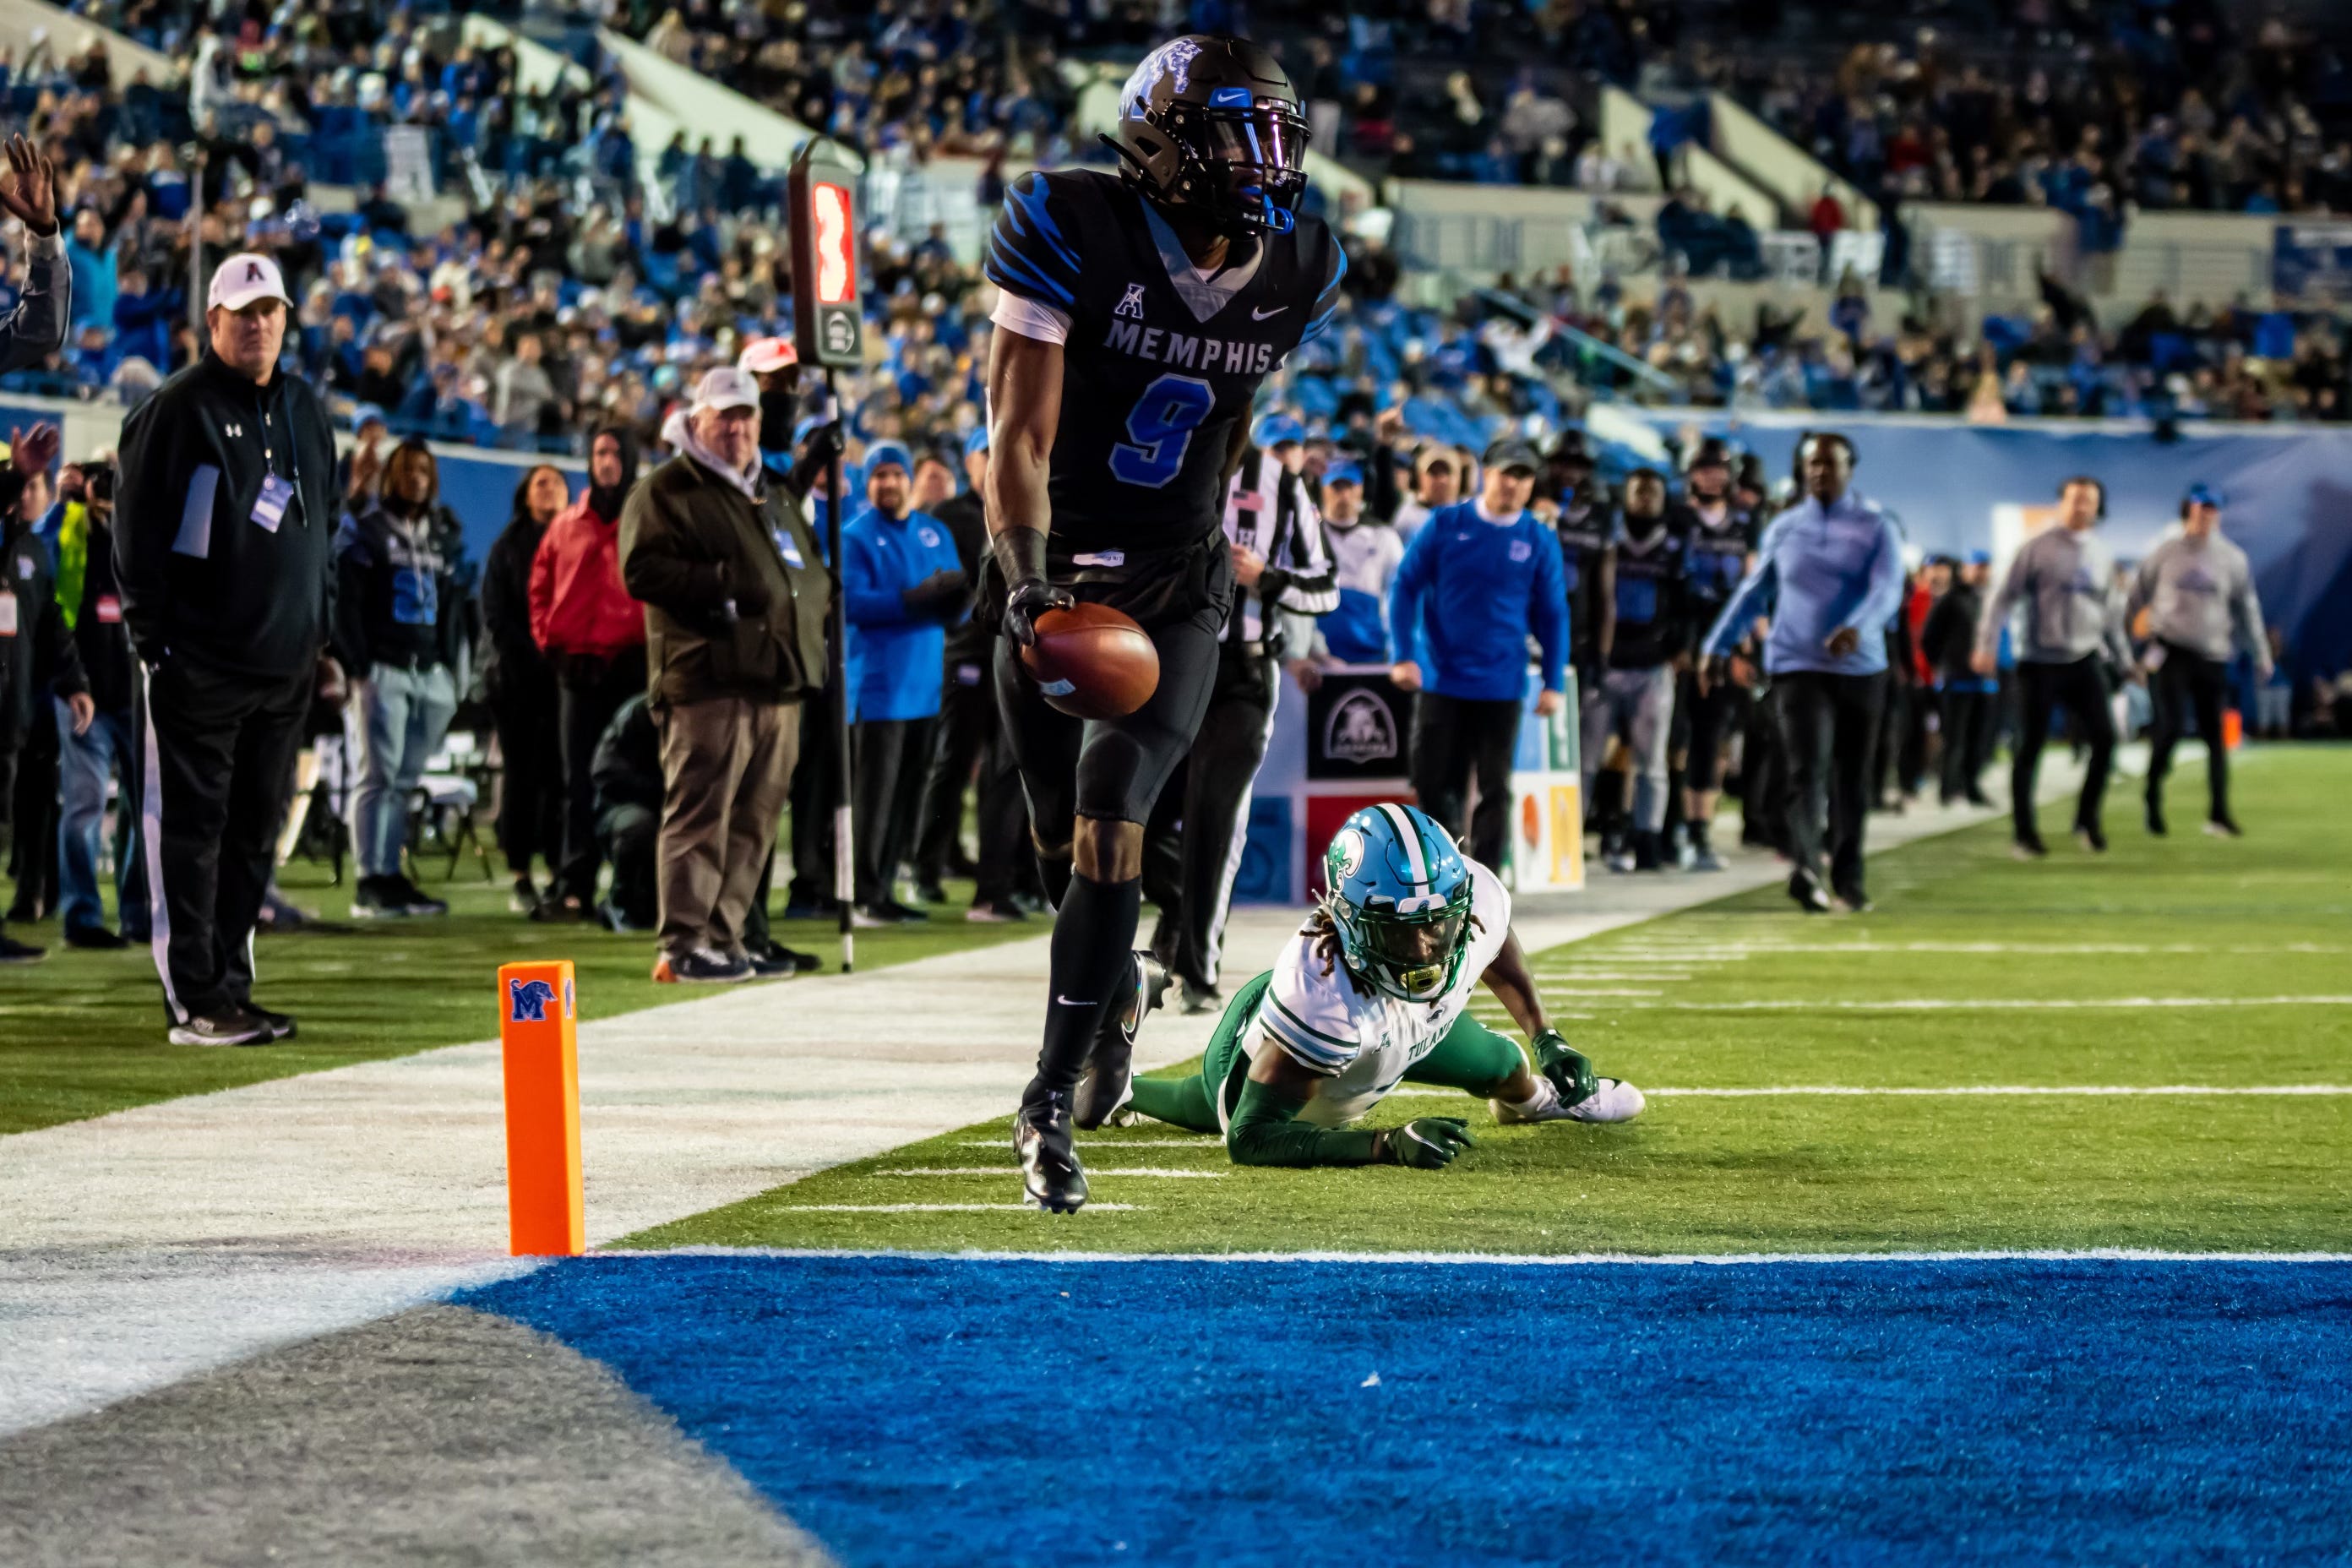 Hawaii Bowl canceled: How to watch the Memphis Tigers vs. Hawaii football game on TV